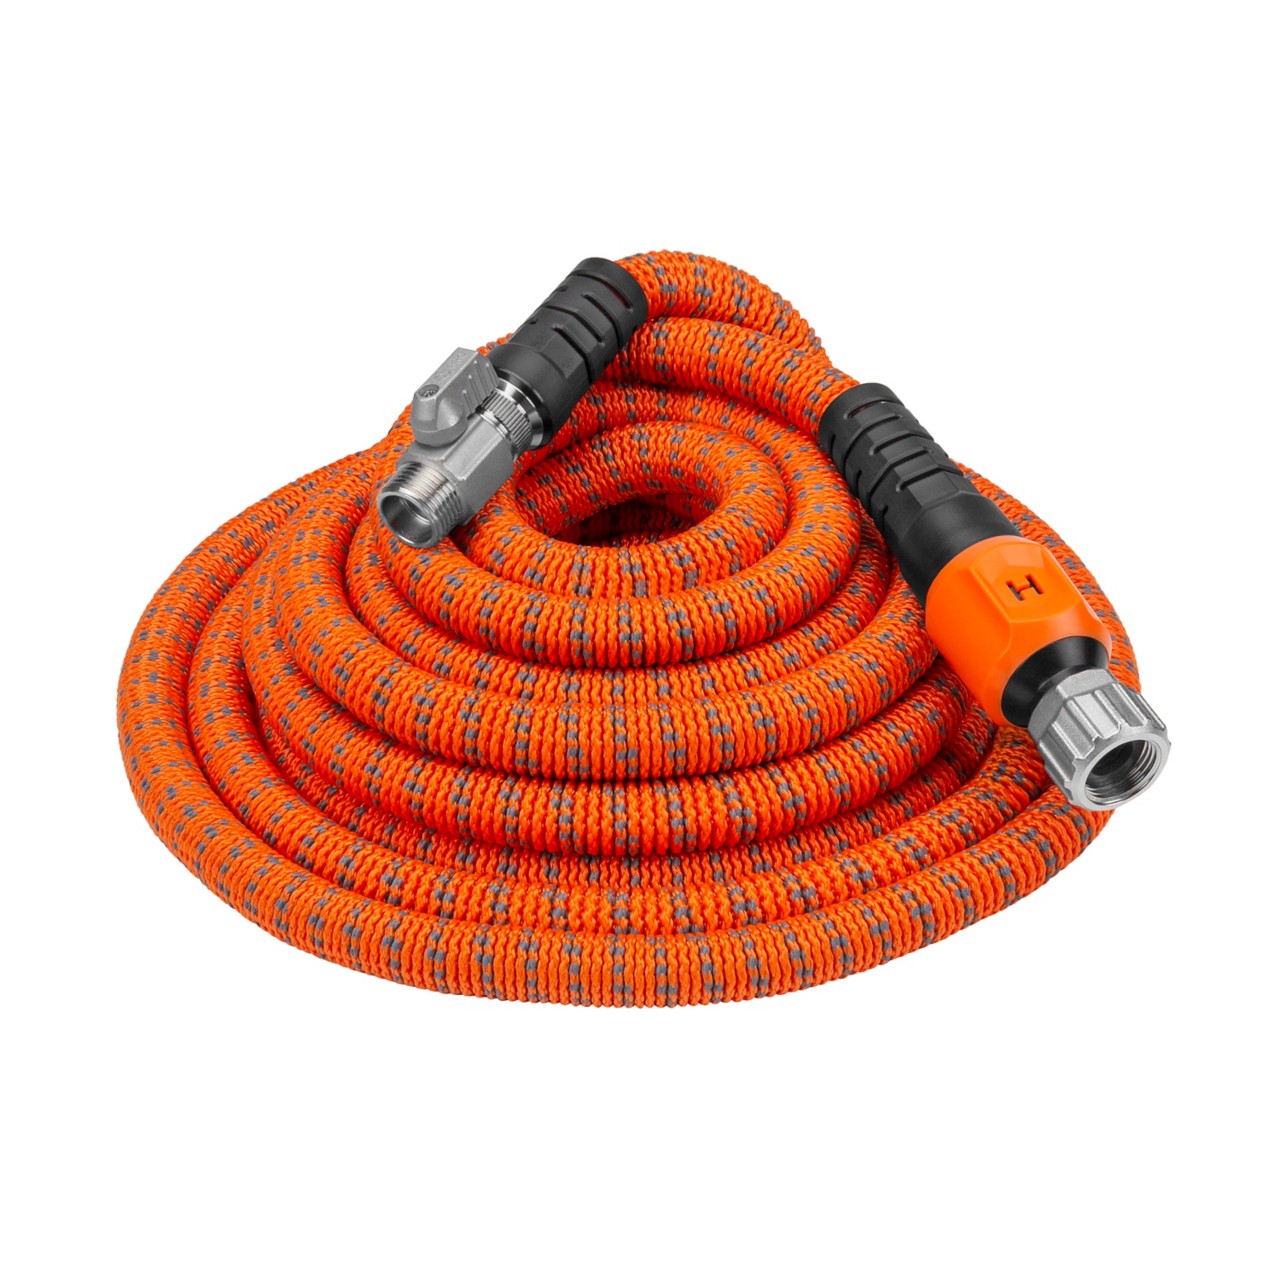 Image of a water hose that links to all garden hose catalog.